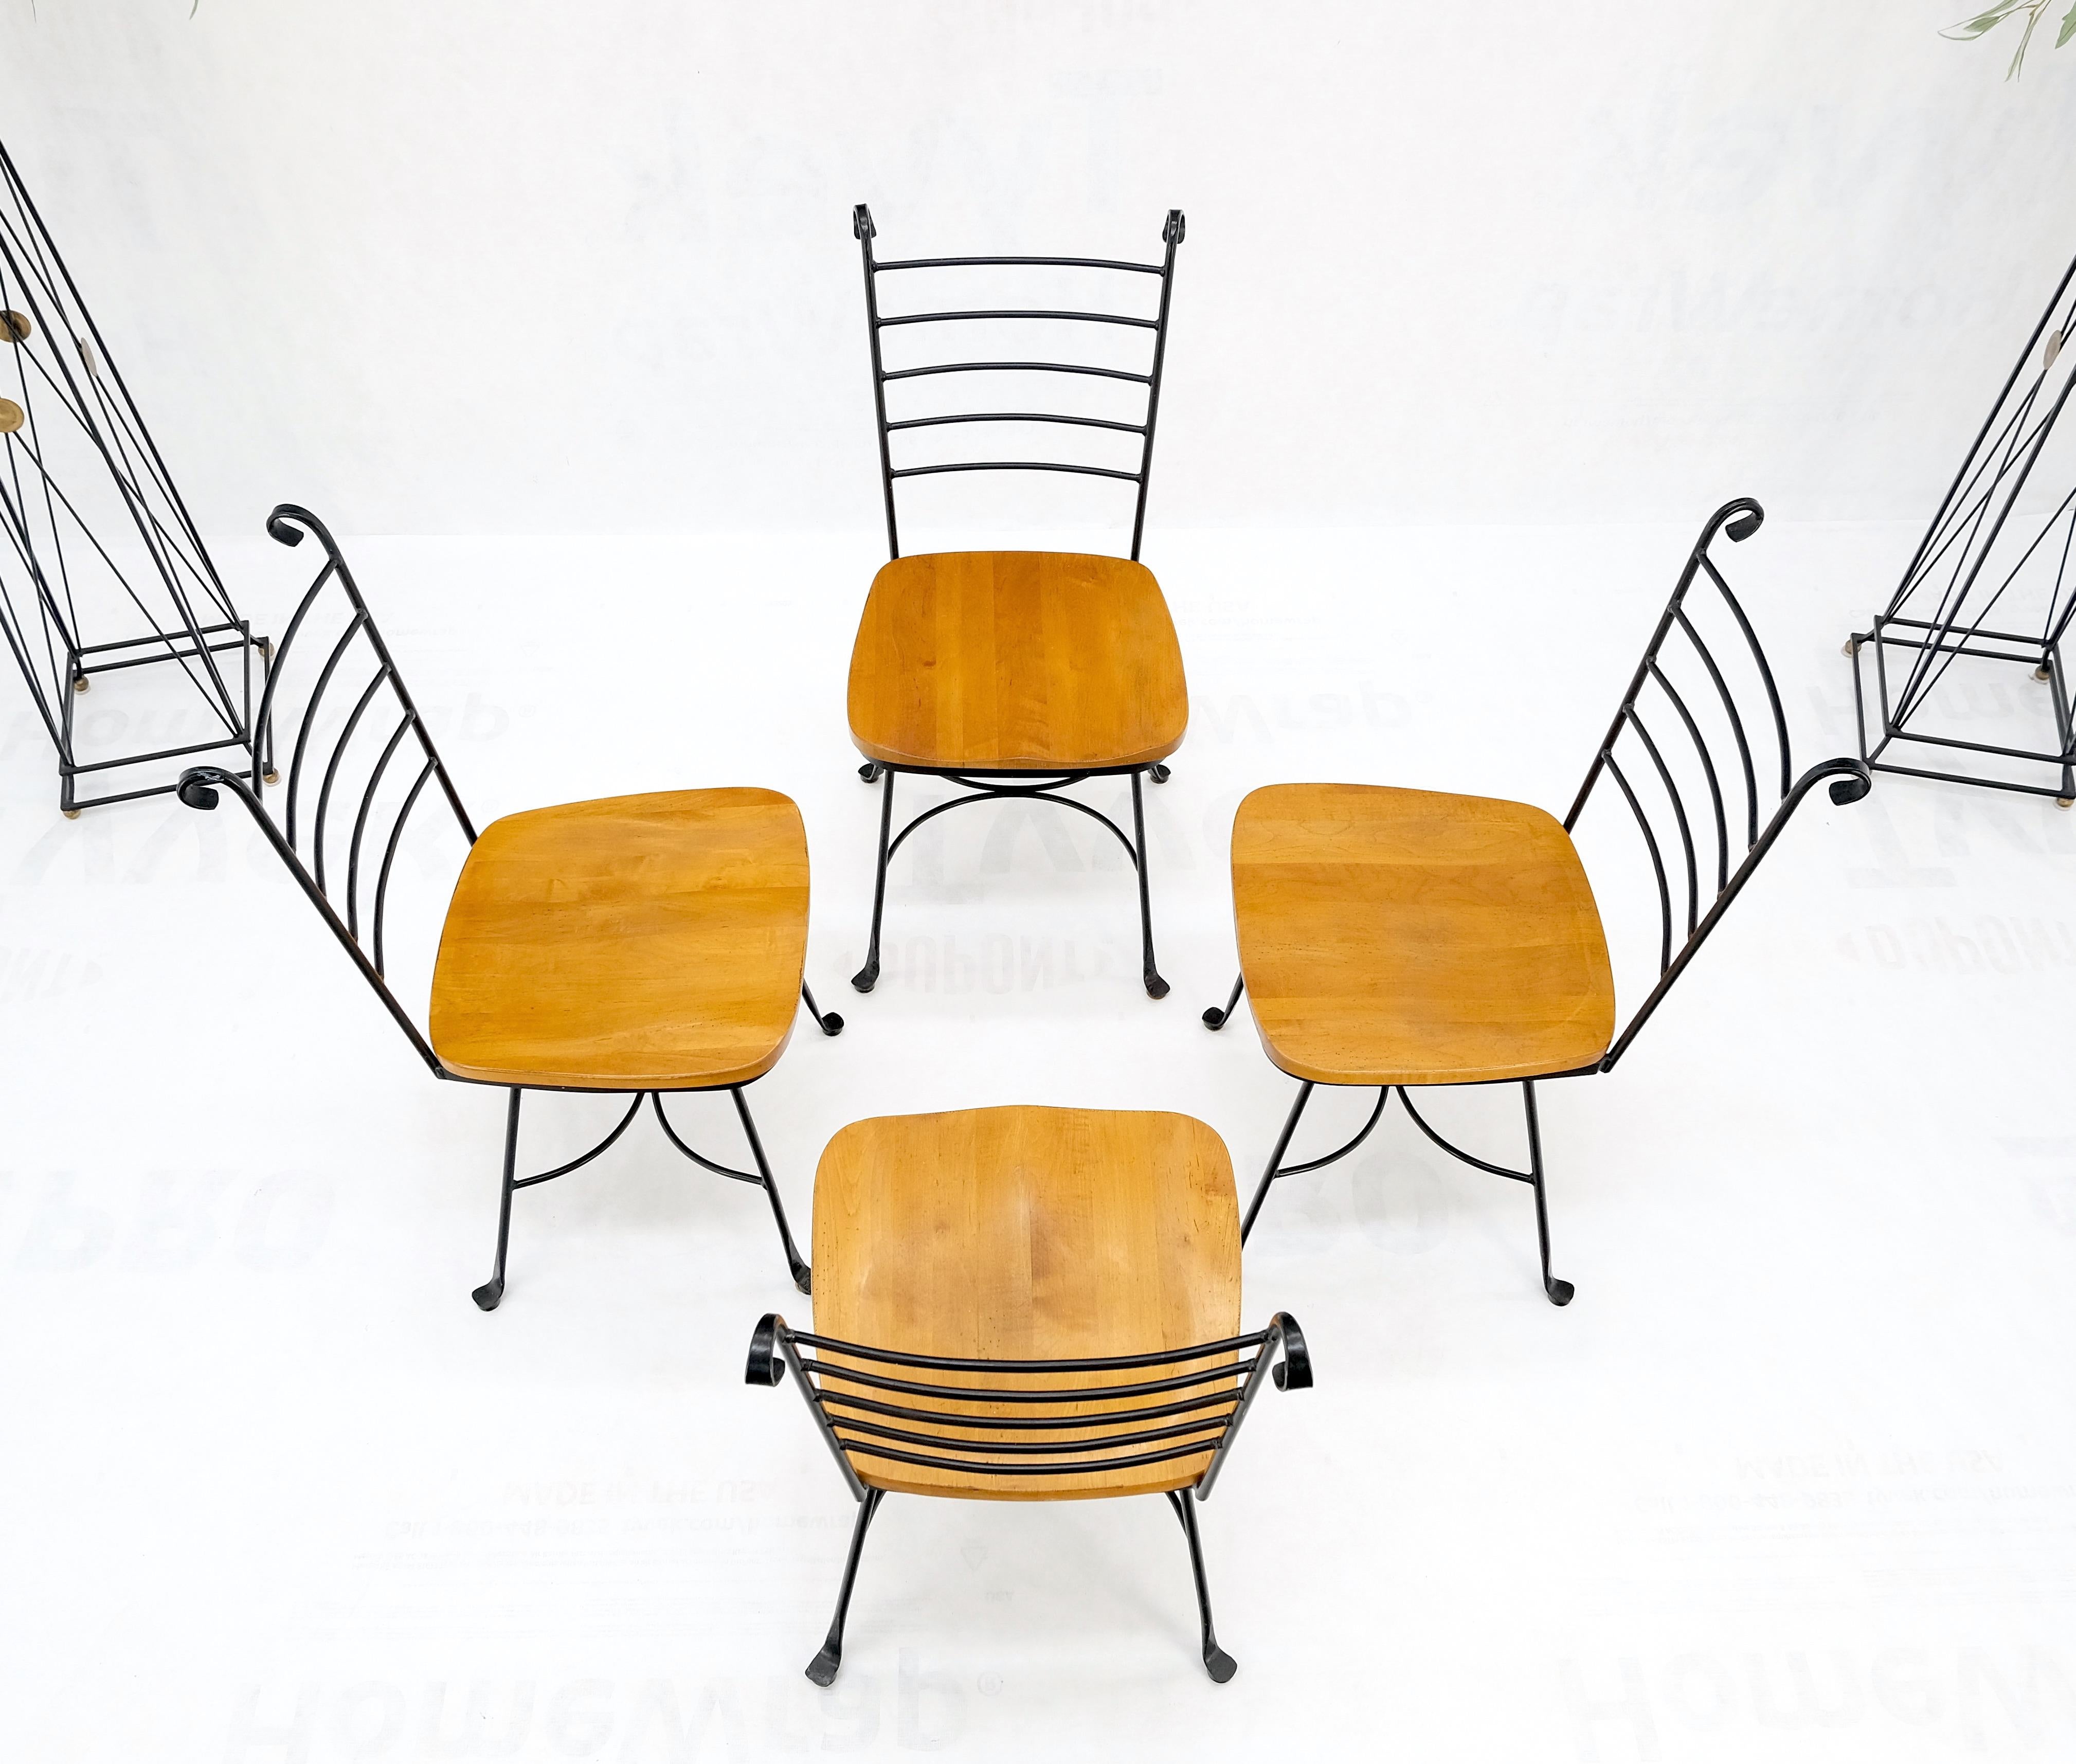 American Mid-Century Modern Wrought Iron & Solid Birch Seats Dining Chairs Mint In Good Condition For Sale In Rockaway, NJ